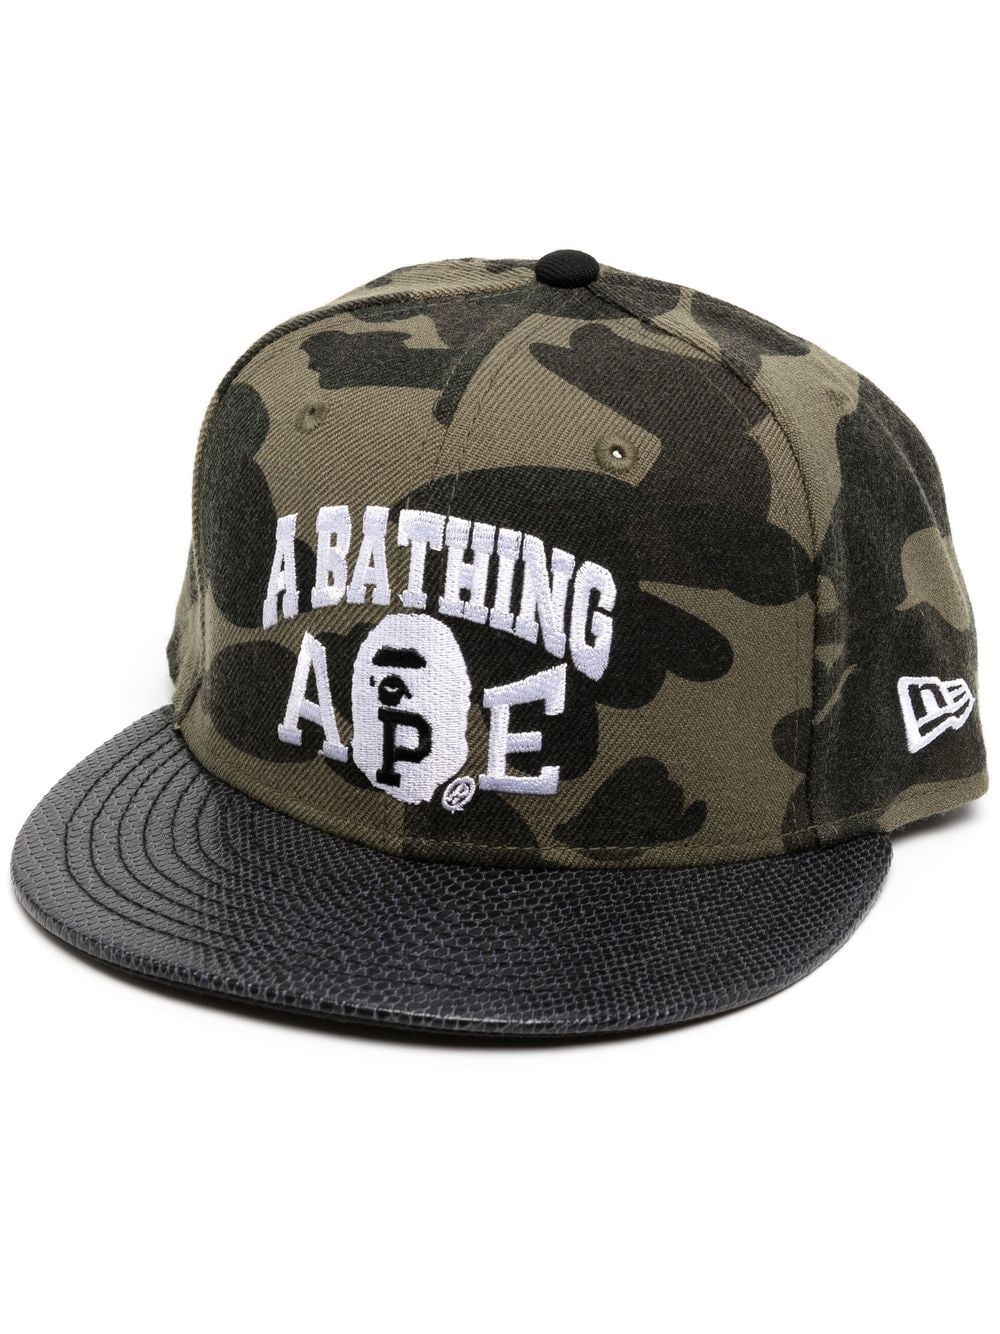 A BATHING APE® embroidered-logo flat cap - Green